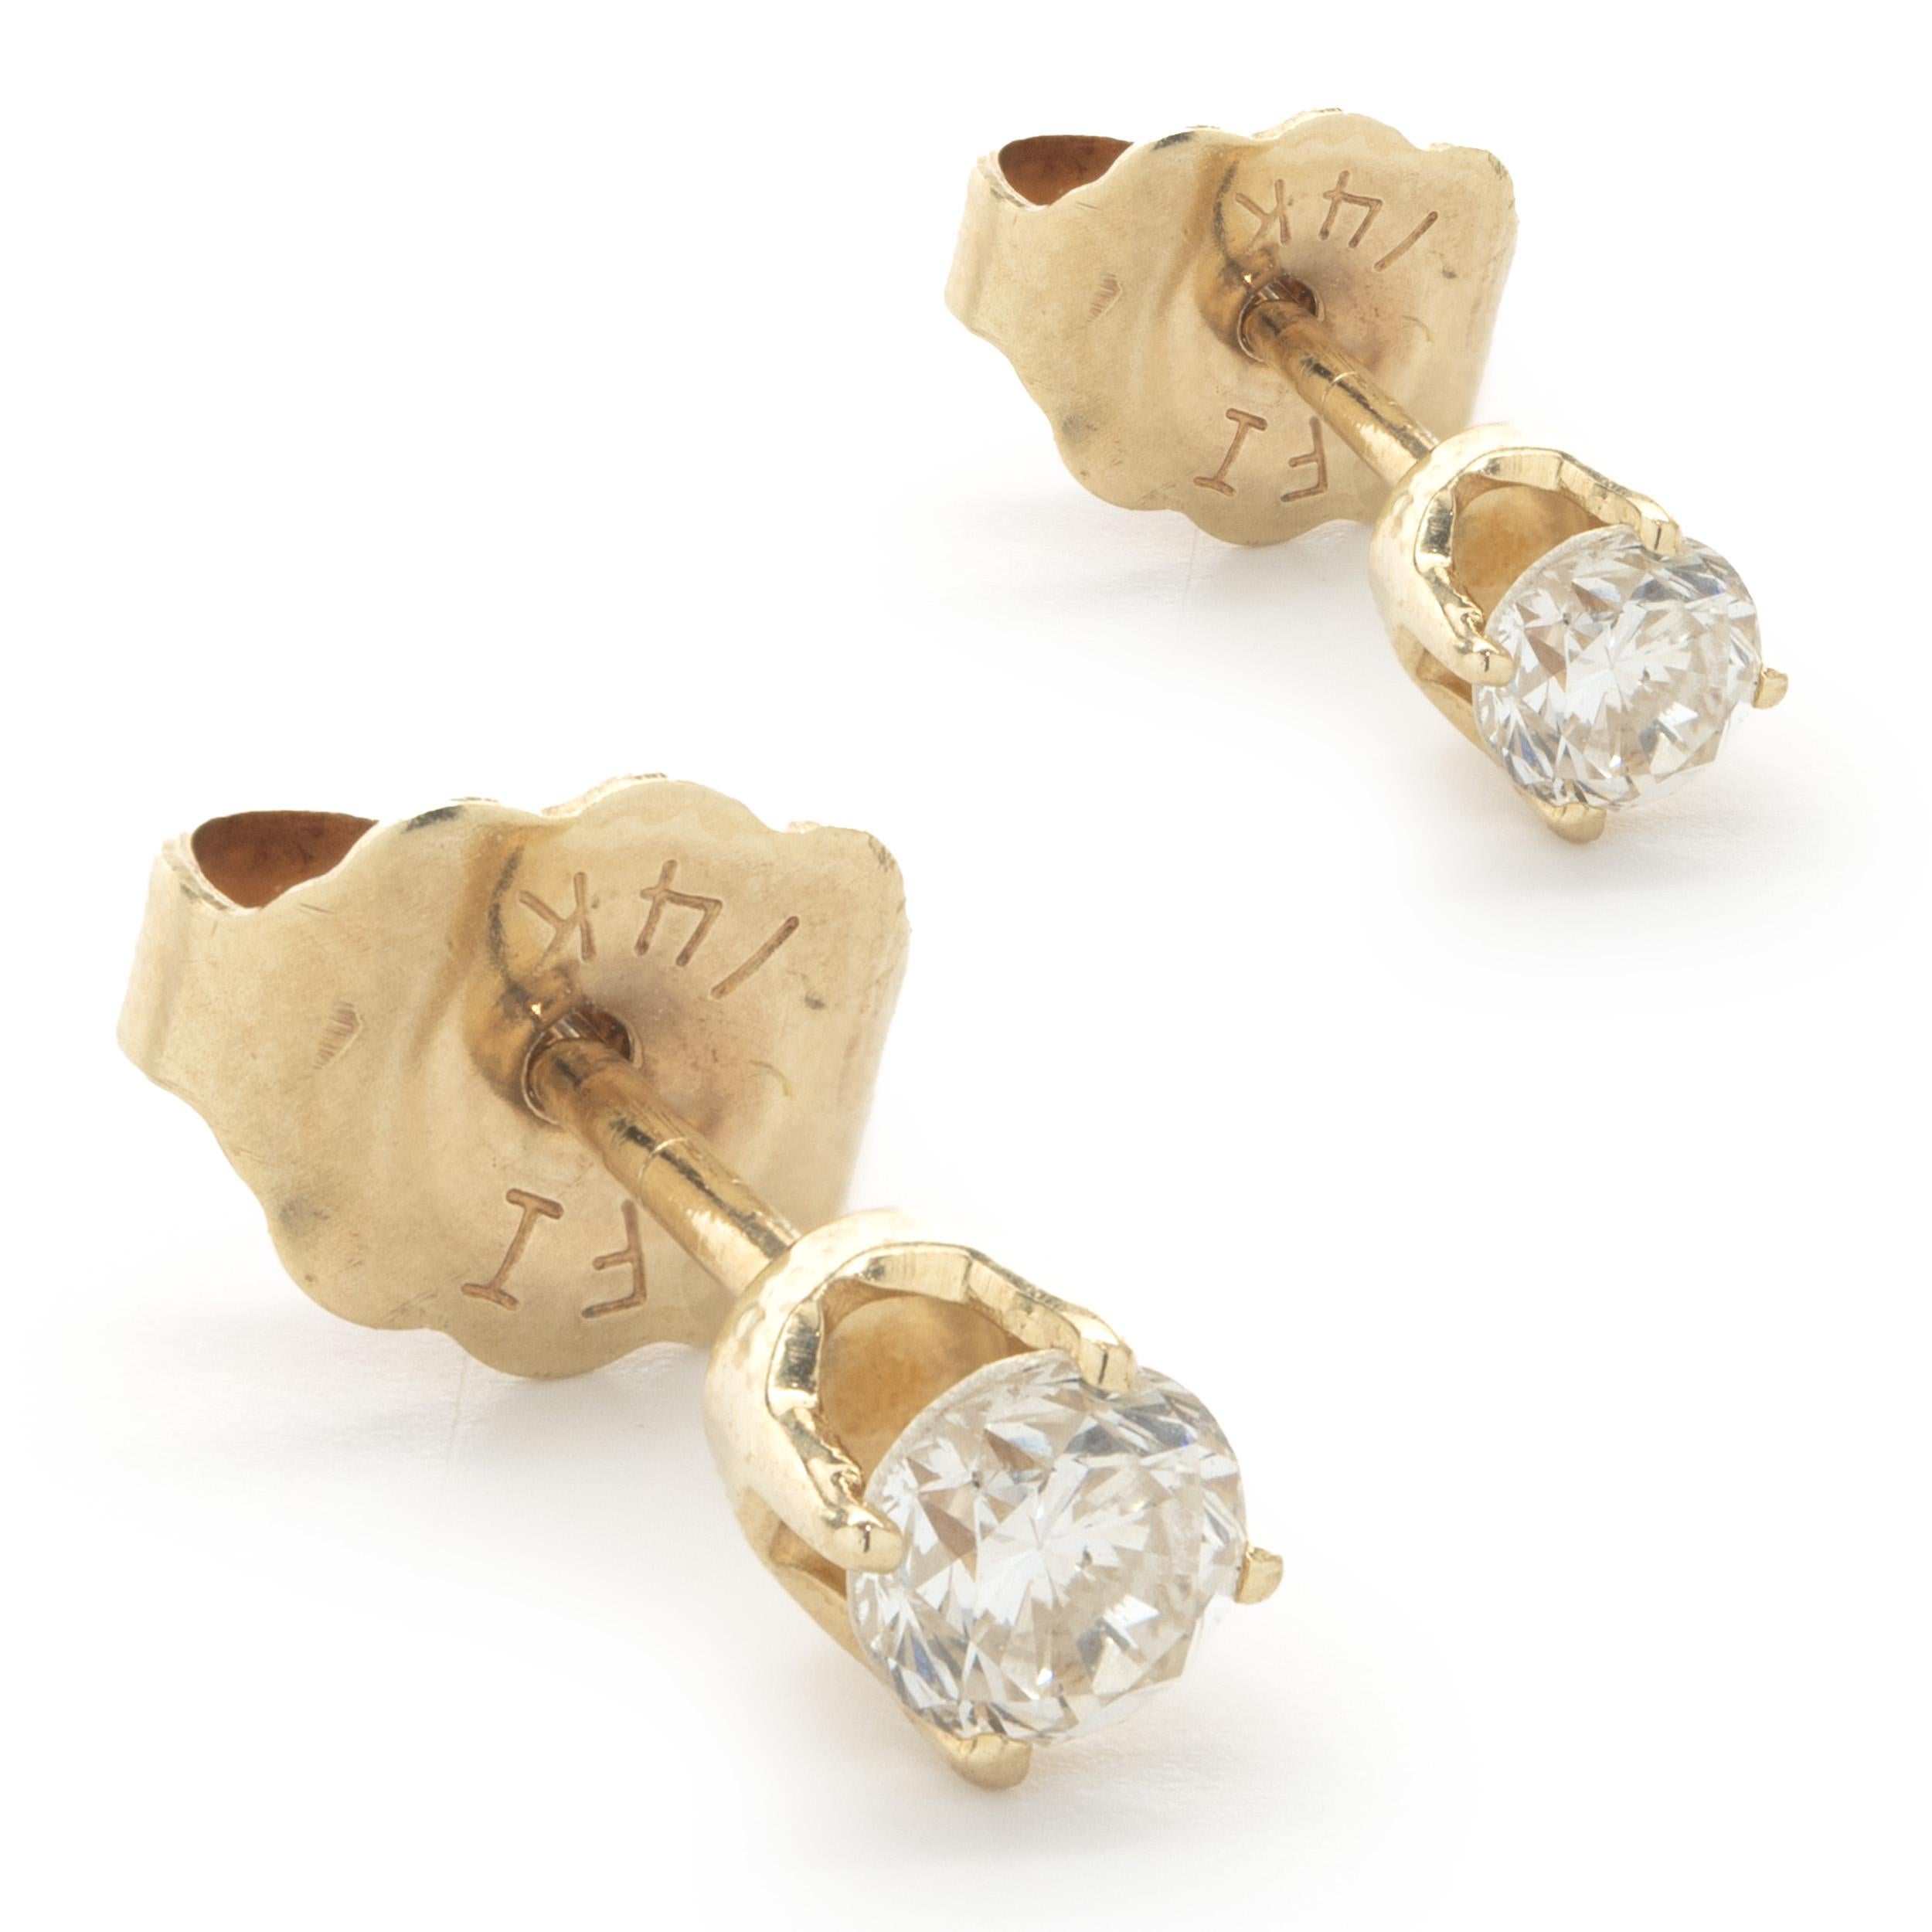 Material: 14k Yellow Gold
Diamond: 2 round brilliant cut = 0.30cttw
Color: G
Clarity: SI1
Dimensions: earrings measure approximately 3.30mm in diameter
Fastenings: post with friction backs
Weight: 0.82 grams
